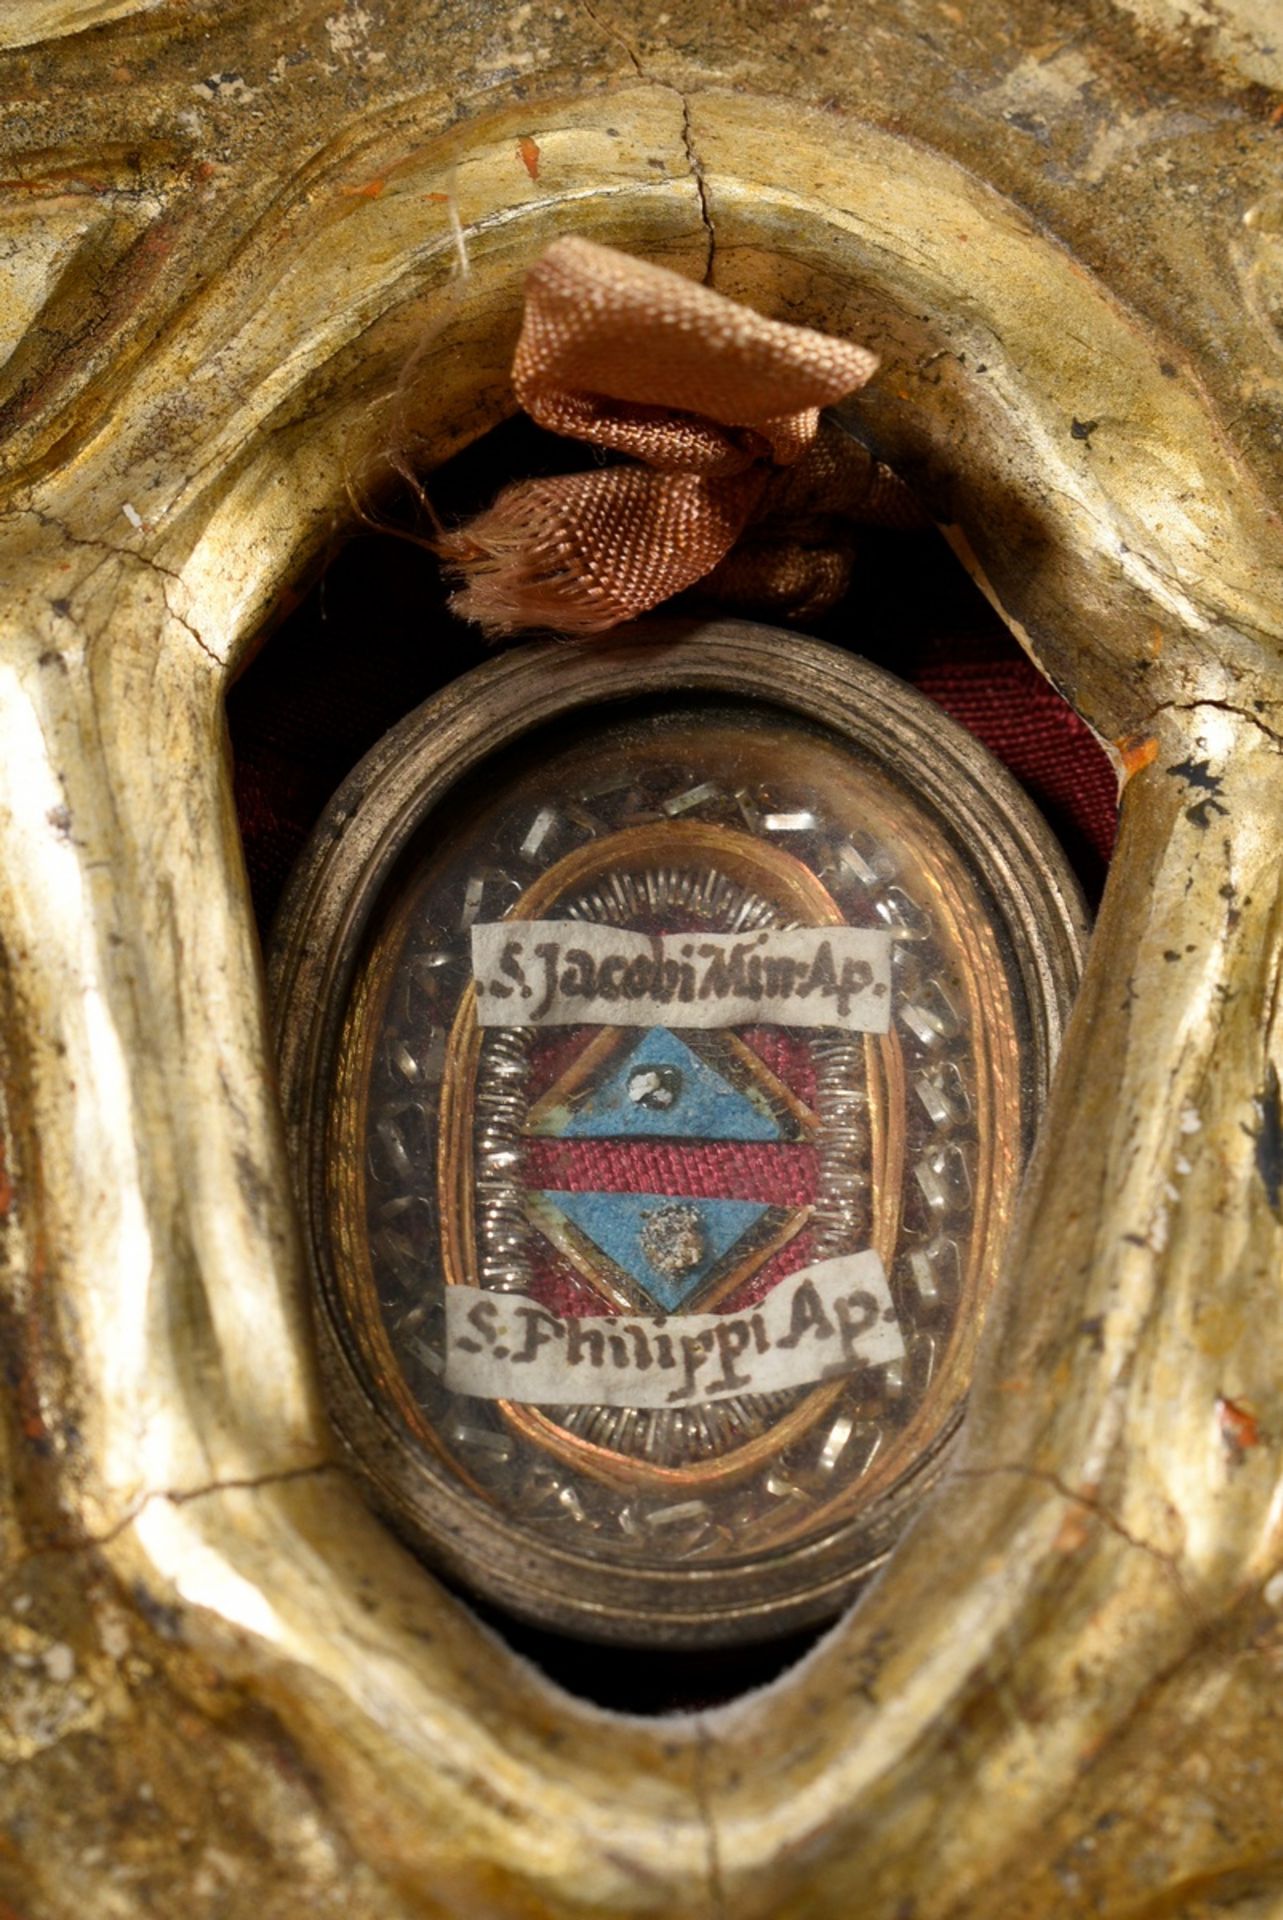 Baroque reliquary with small monastery work "S. Jacobi..." and S. Philippi Ap.", 18th c., carved an - Image 5 of 5